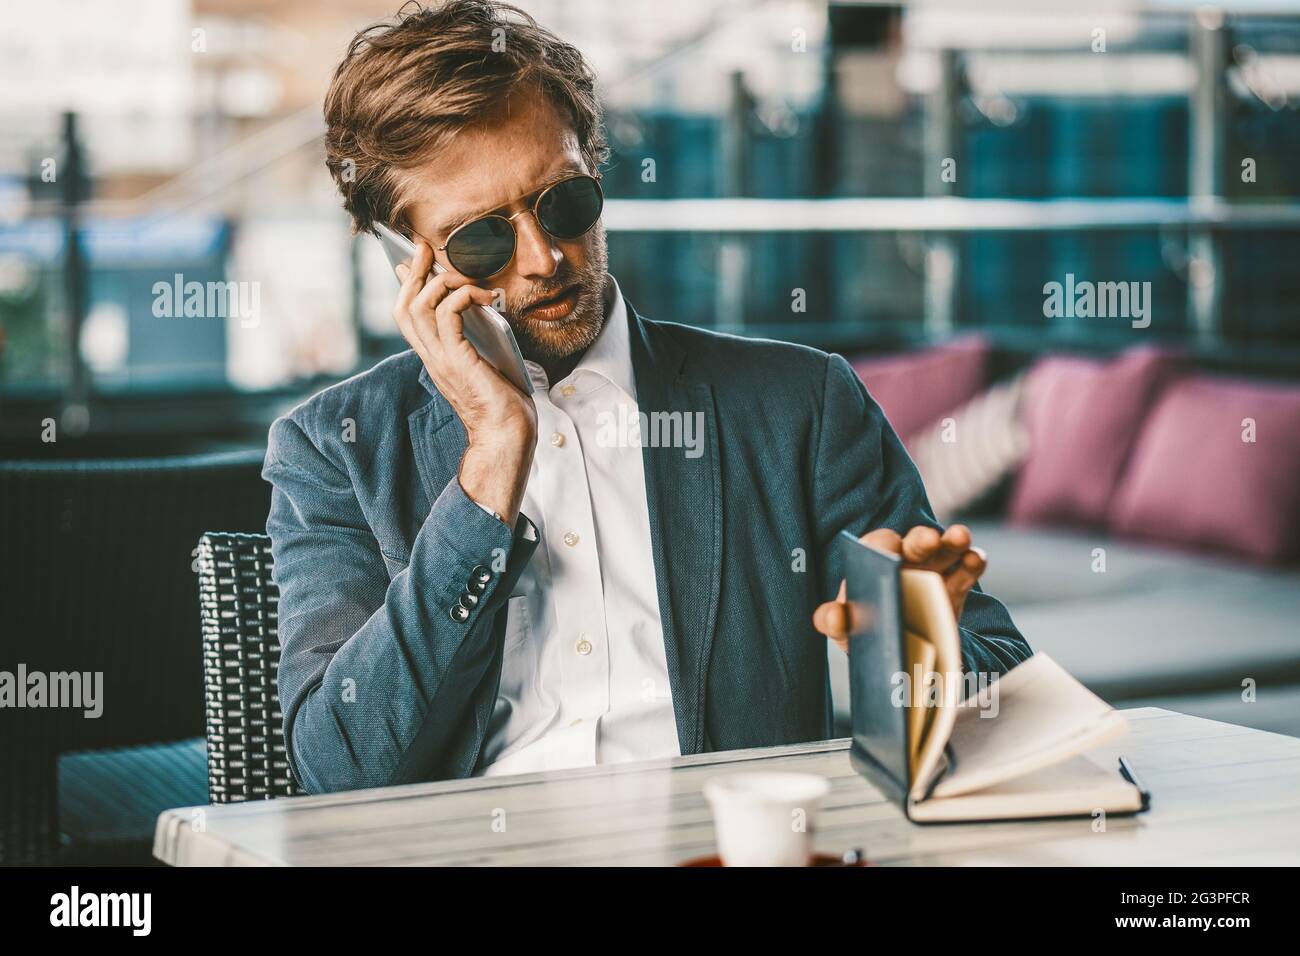 Young businessman doing schedule entrees while talking on a phone Stock Photo